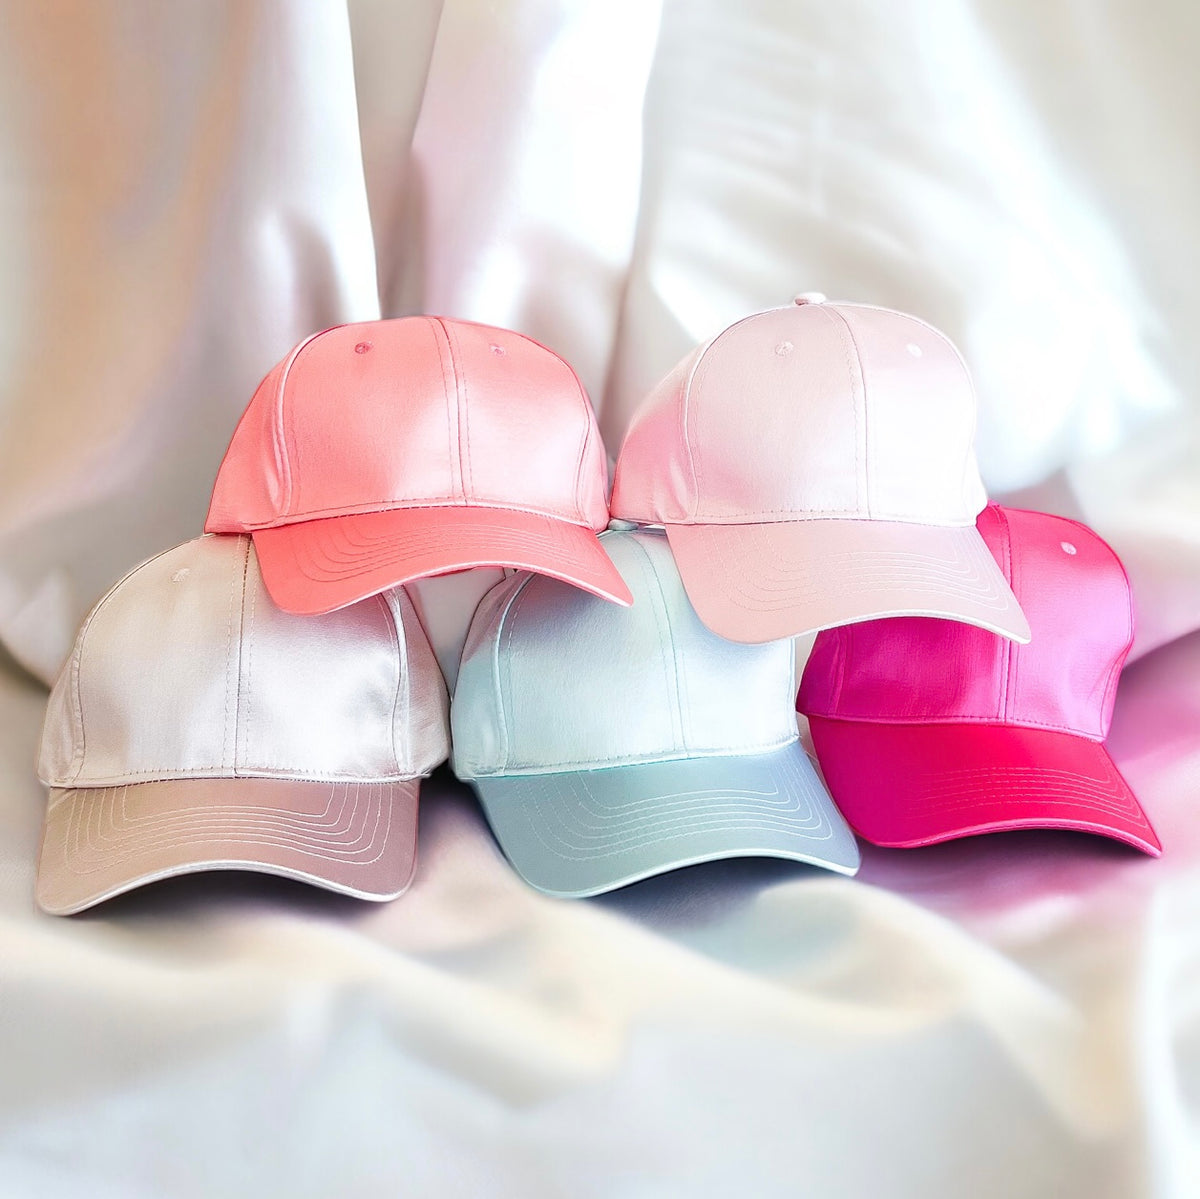 Satin Baseball Cap-260 Other Accessories-Germany-Coastal Bloom Boutique, find the trendiest versions of the popular styles and looks Located in Indialantic, FL